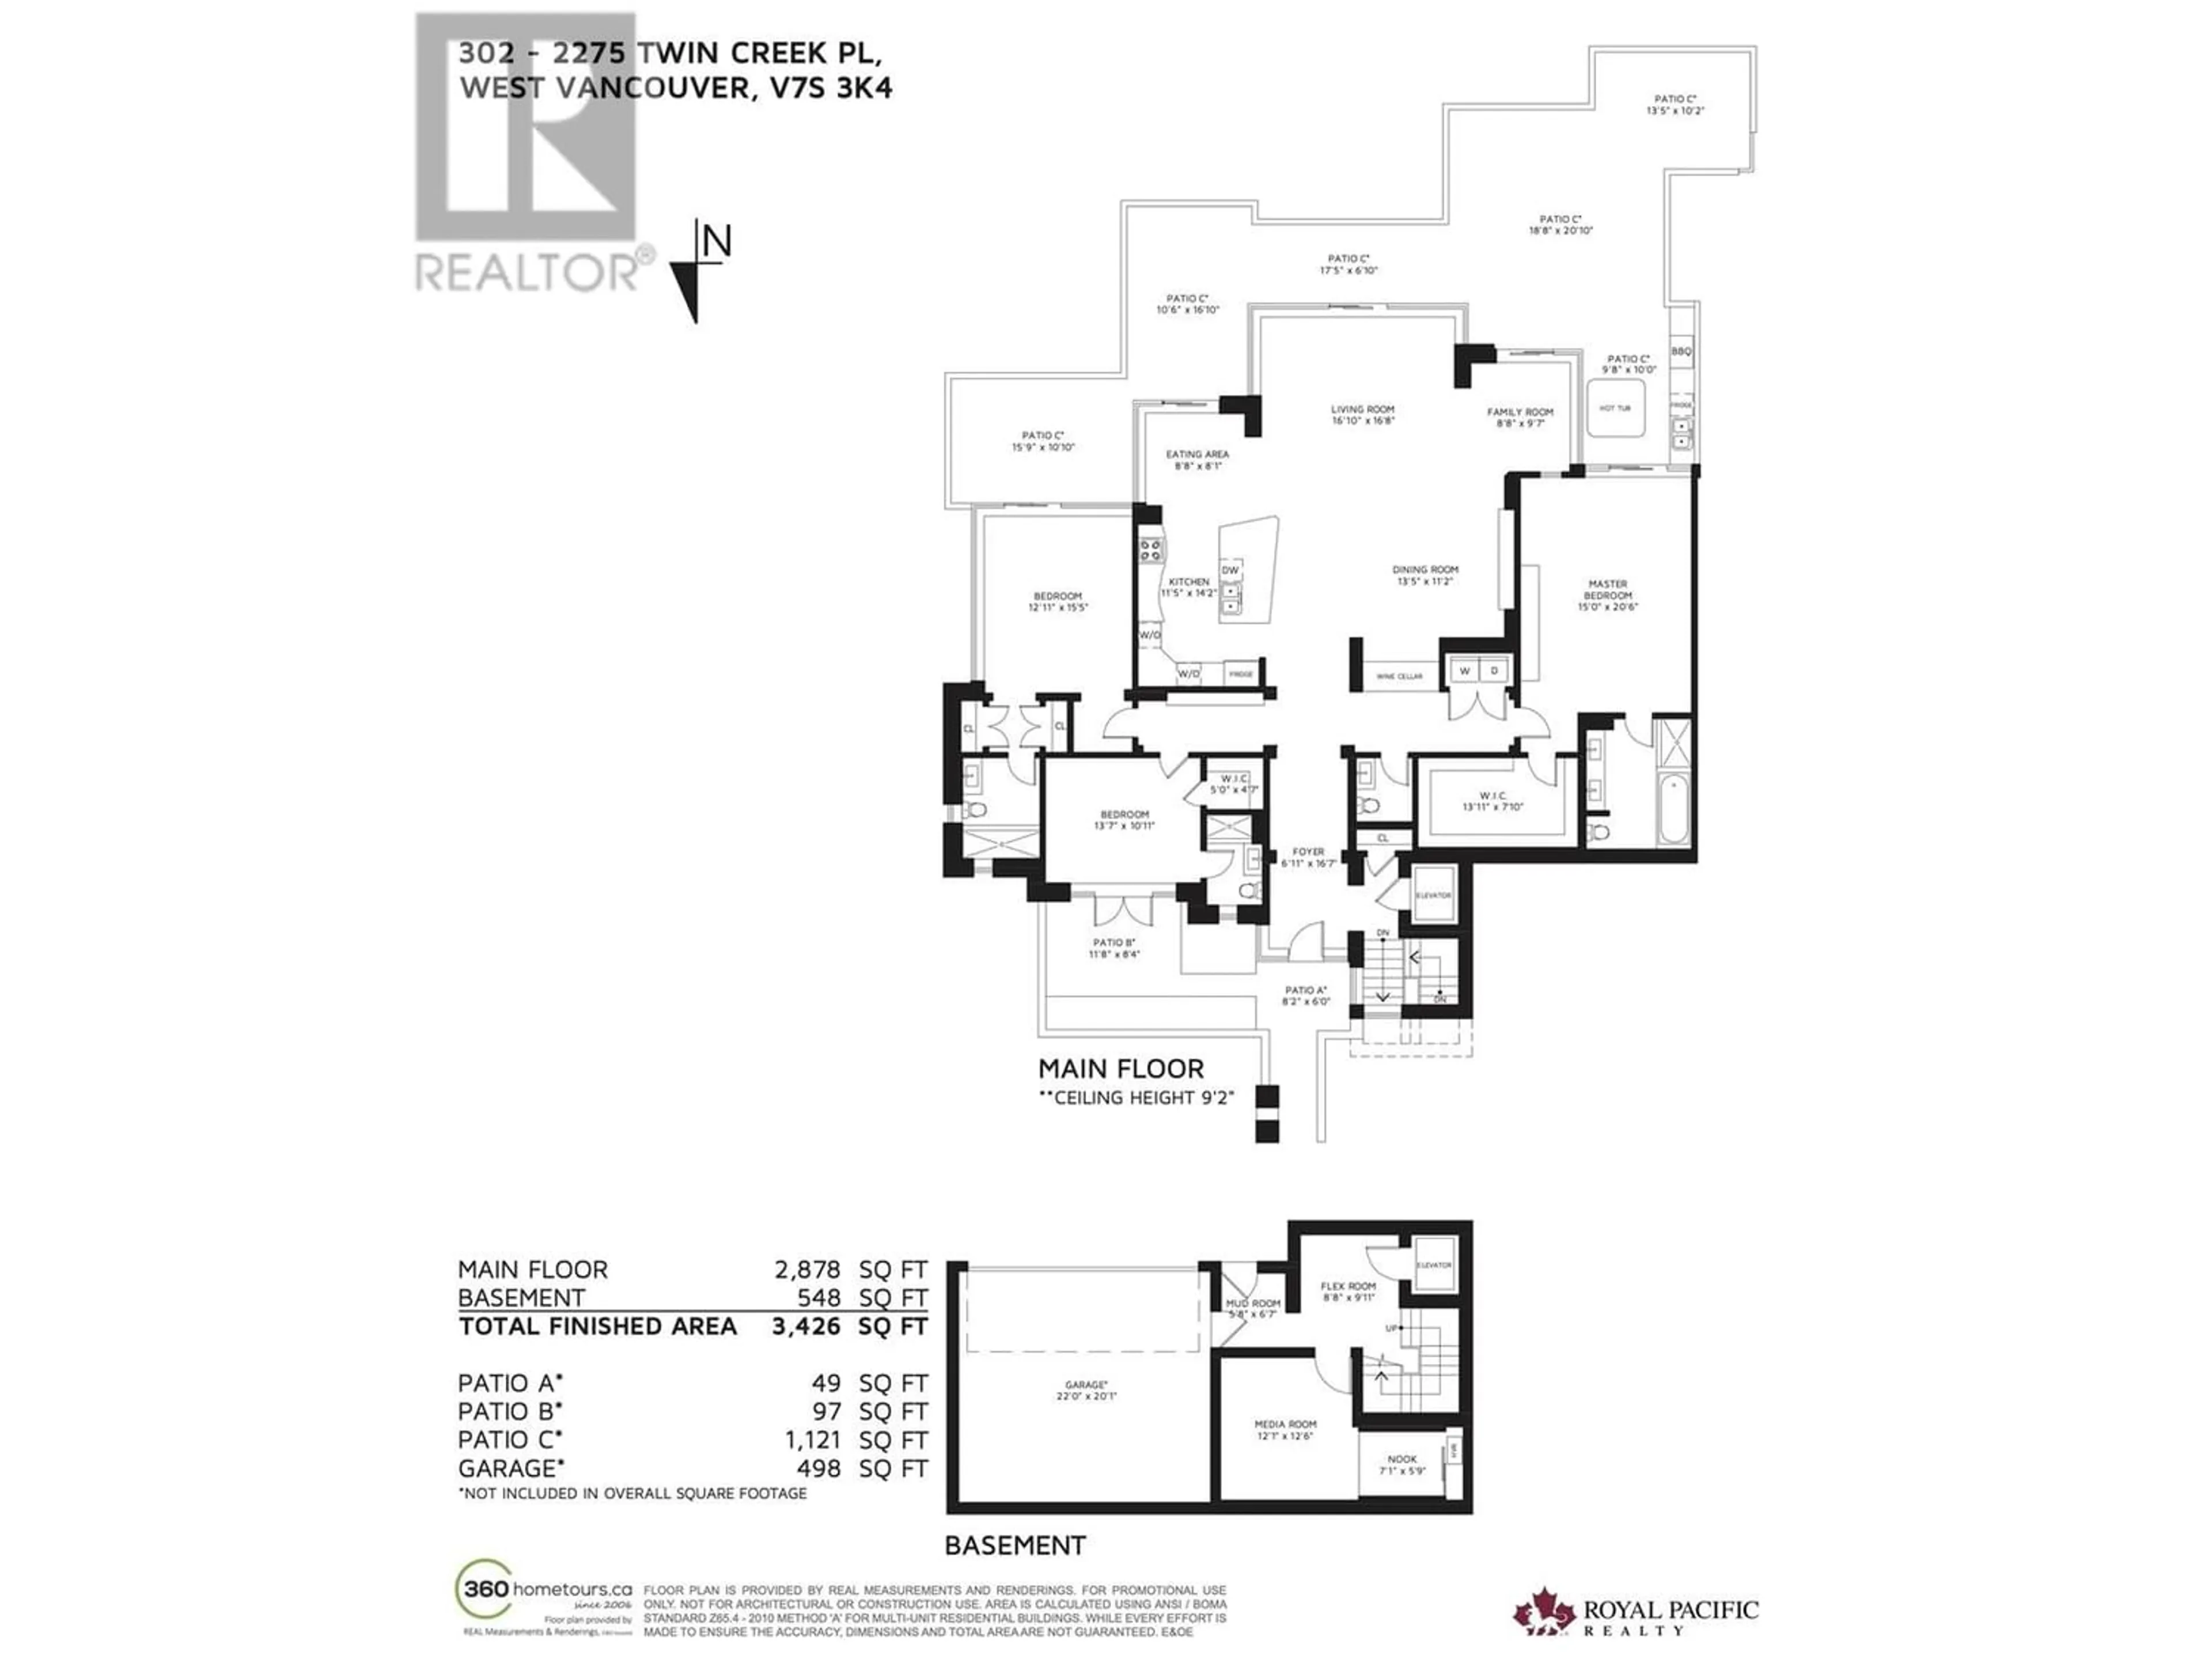 Floor plan for 302 2275 TWIN CREEK PLACE, West Vancouver British Columbia V7S3K4